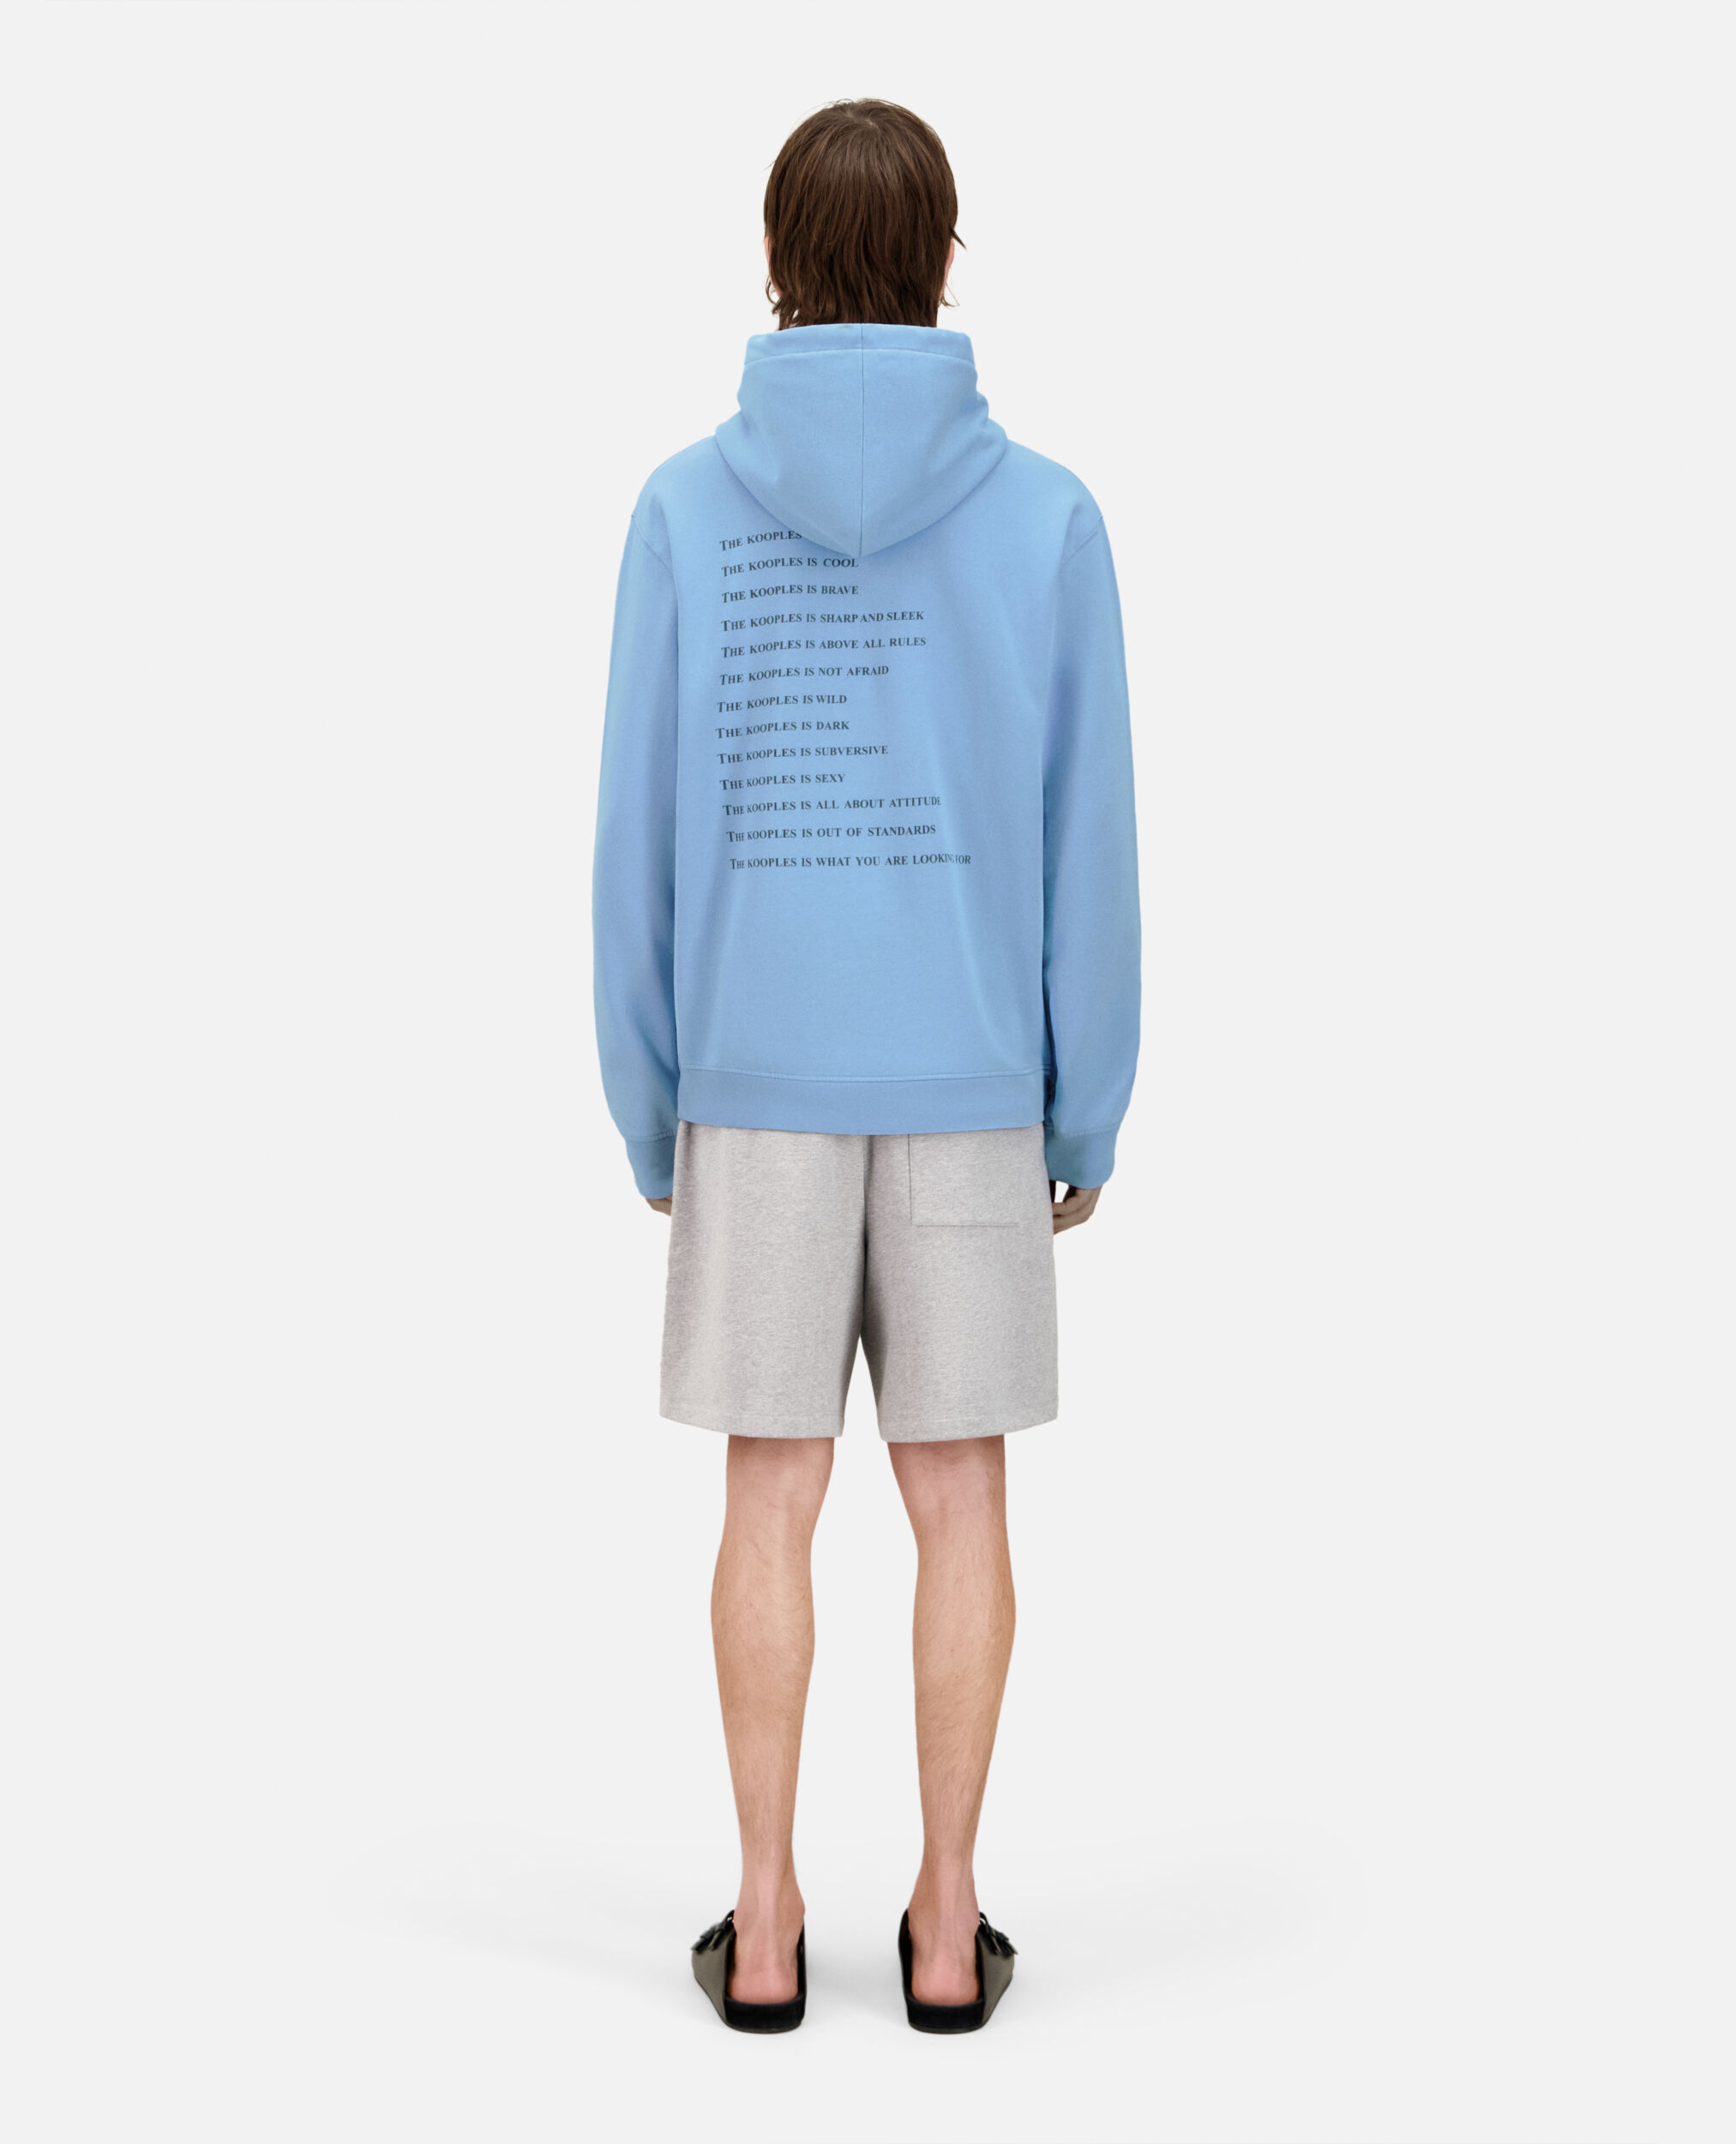 Sudadera capucha What is azul, STEEL BLUE, hi-res image number null